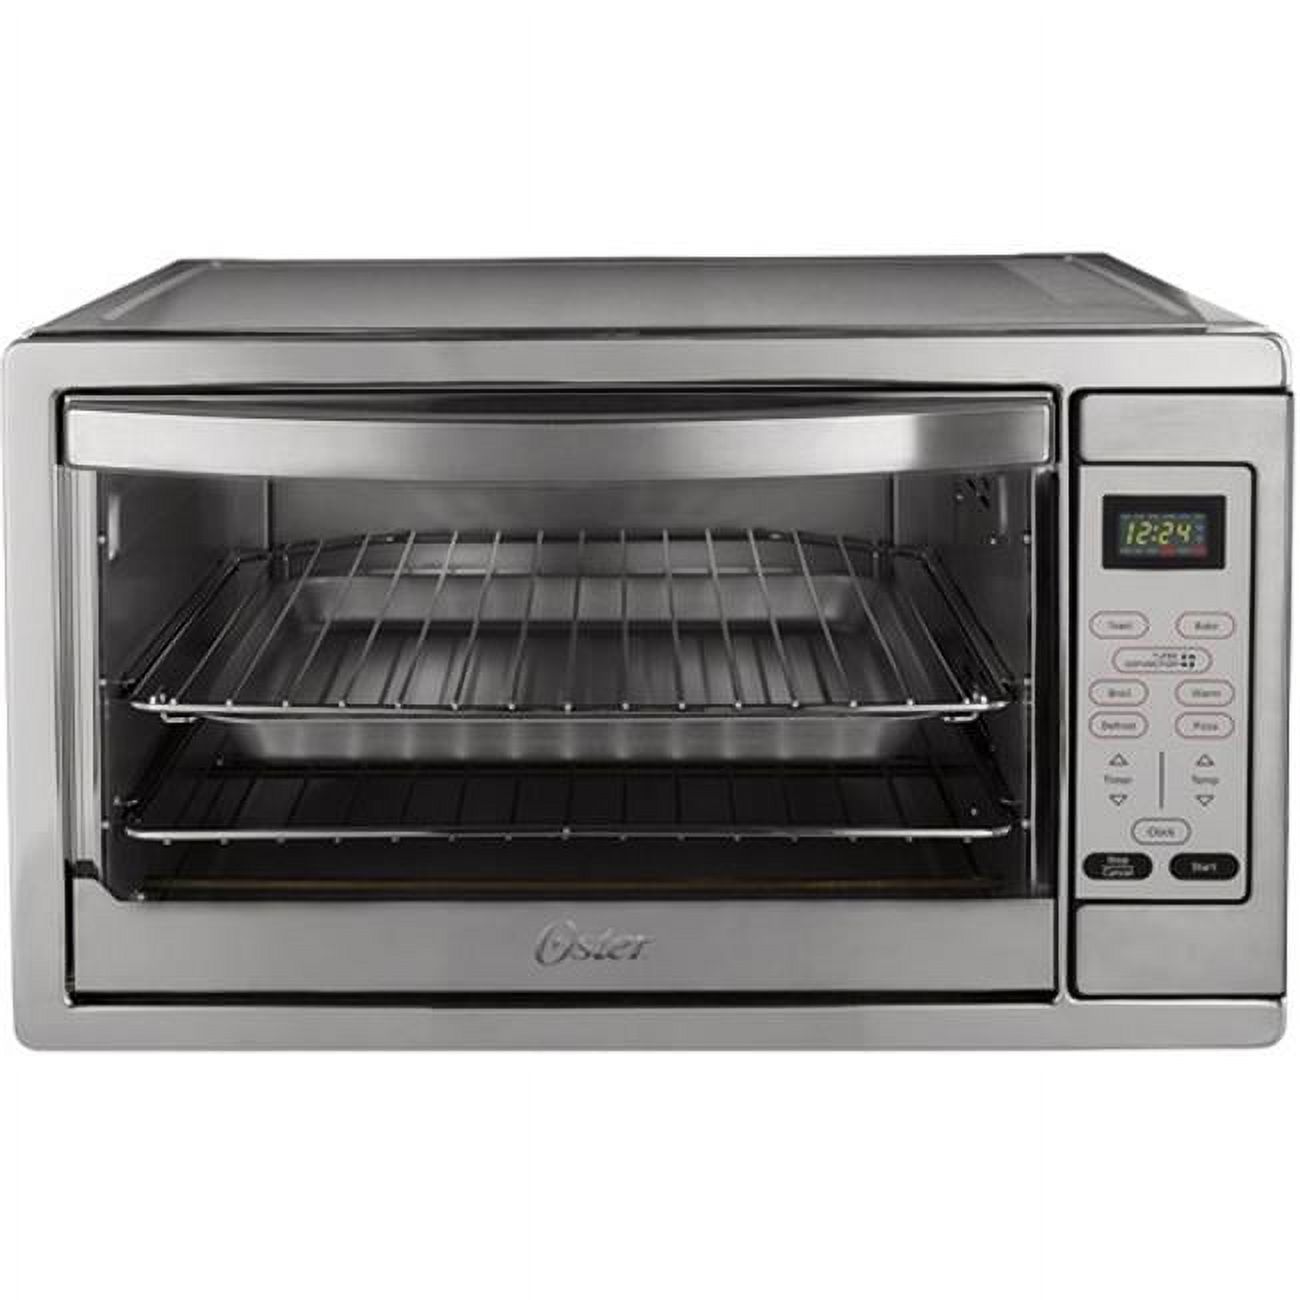 Oster 1500 watt Extra Large Digital Countertop Oven, Brushed Stainless Steel - image 1 of 1